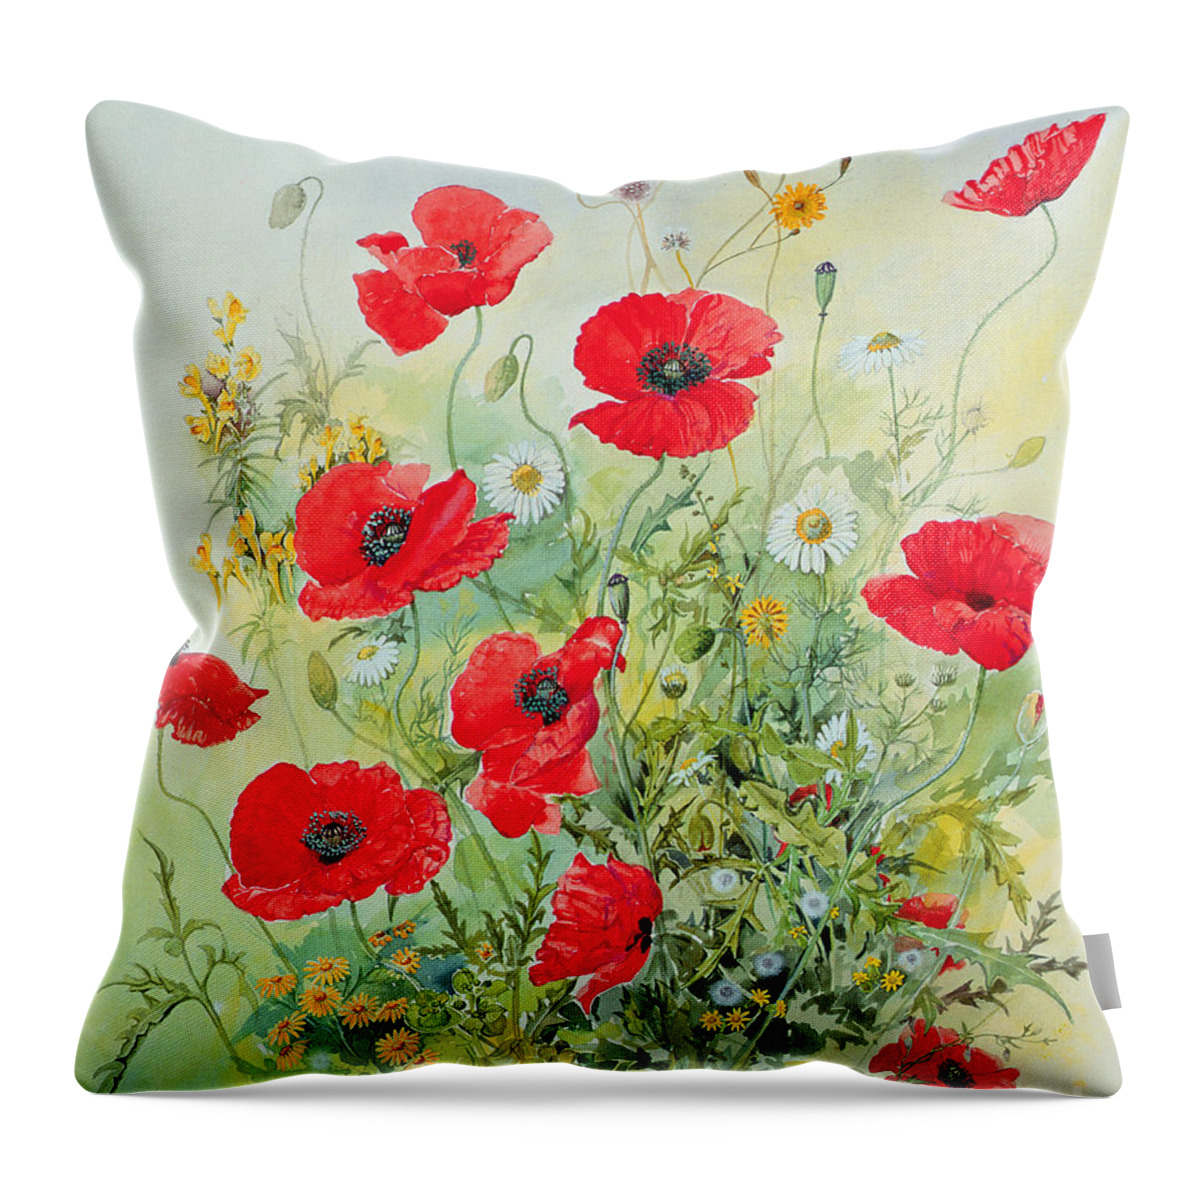 Flowers; Botanical; Flower; Poppies; Mayweed; Leaf; Leafs; Leafy; Flower; Red Flower; White Flower; Yellow Flower; Poppie; Mayweeds Throw Pillow featuring the painting Poppies and Mayweed by John Gubbins